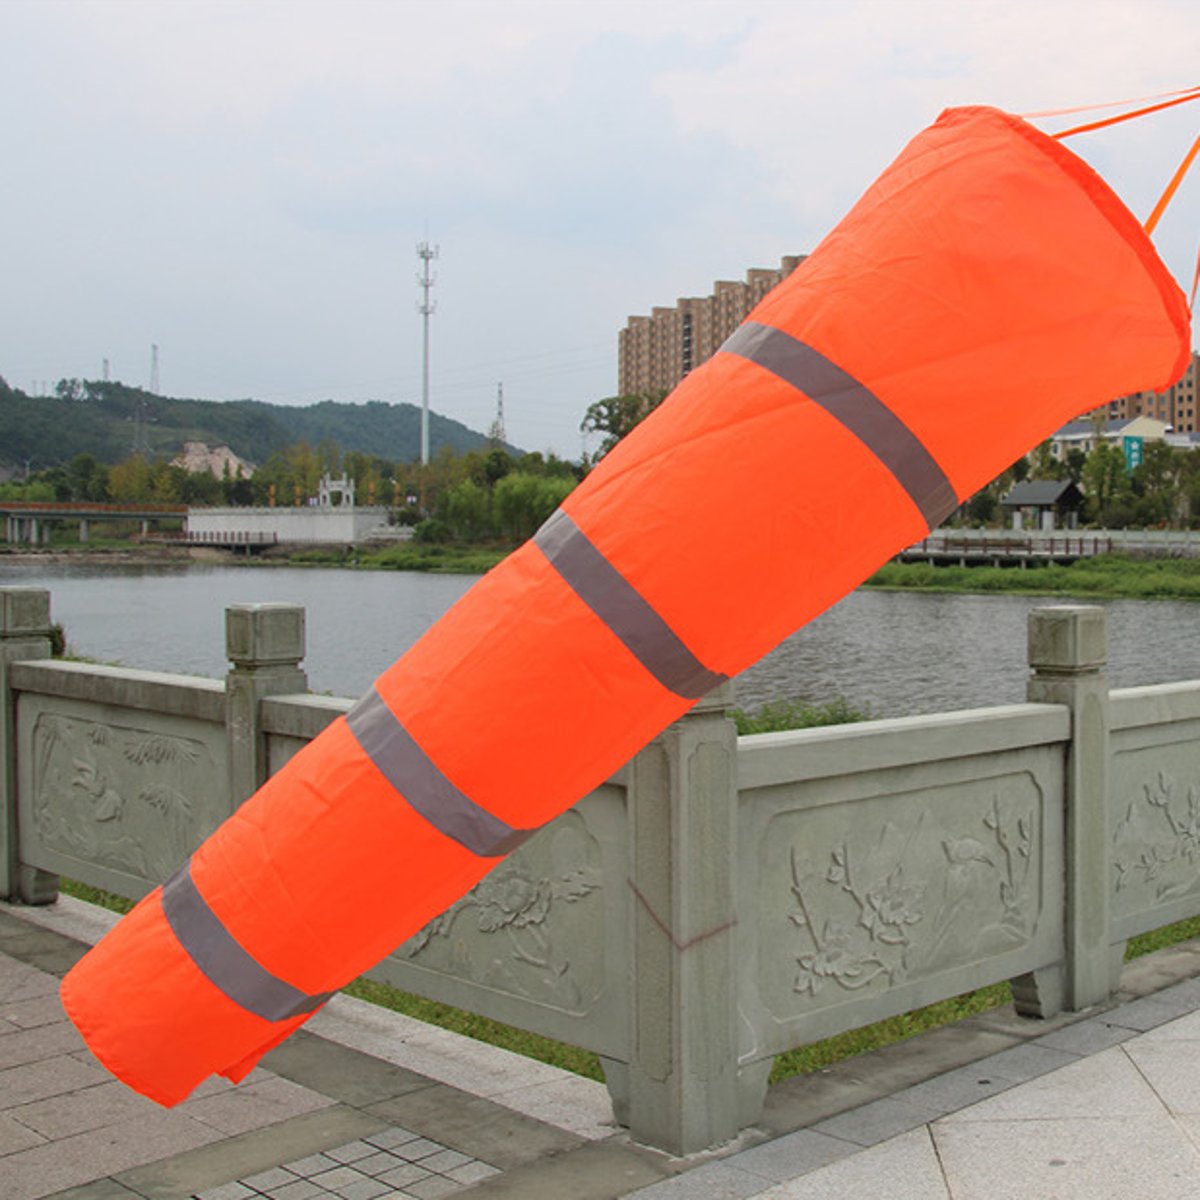 Reflective-Tape-Outdoor-Windsocks-Bag-Weather-Station-Flag-Belt-for-Airport-Garden-Patio-Lawn-Safety-1573310-9